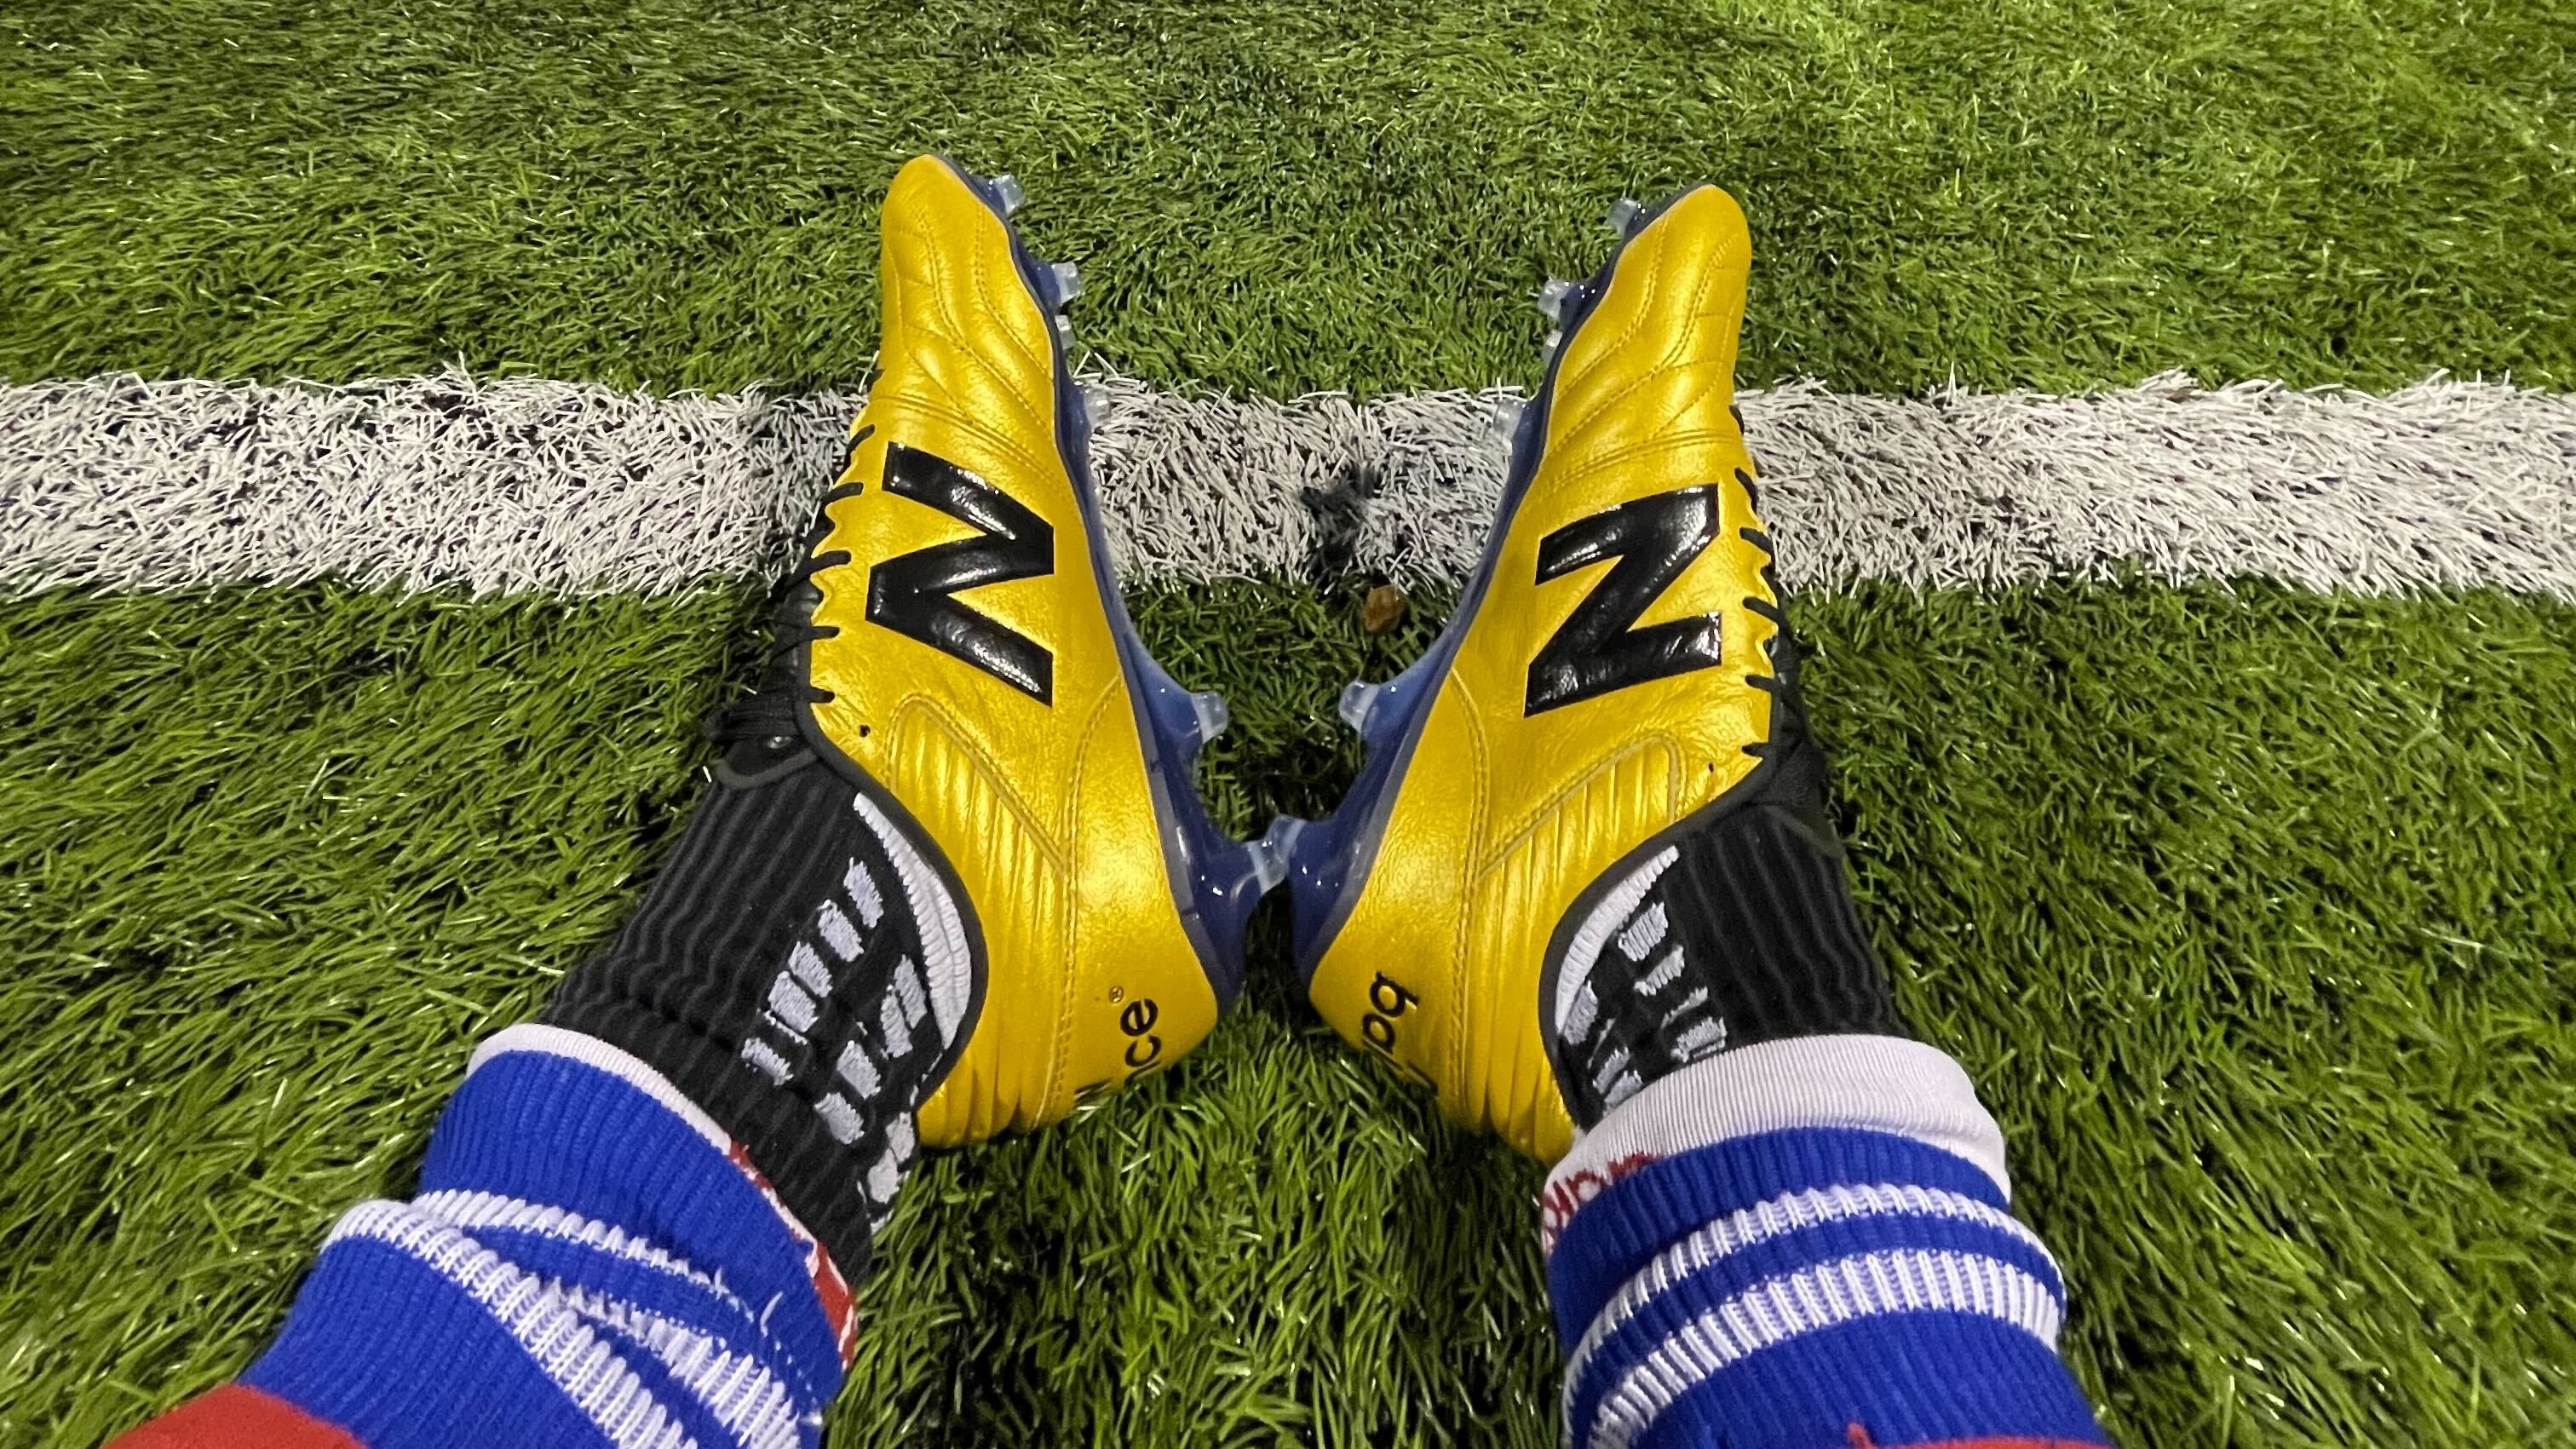 The Best Astro-turf Football Boots, Tried and Tested